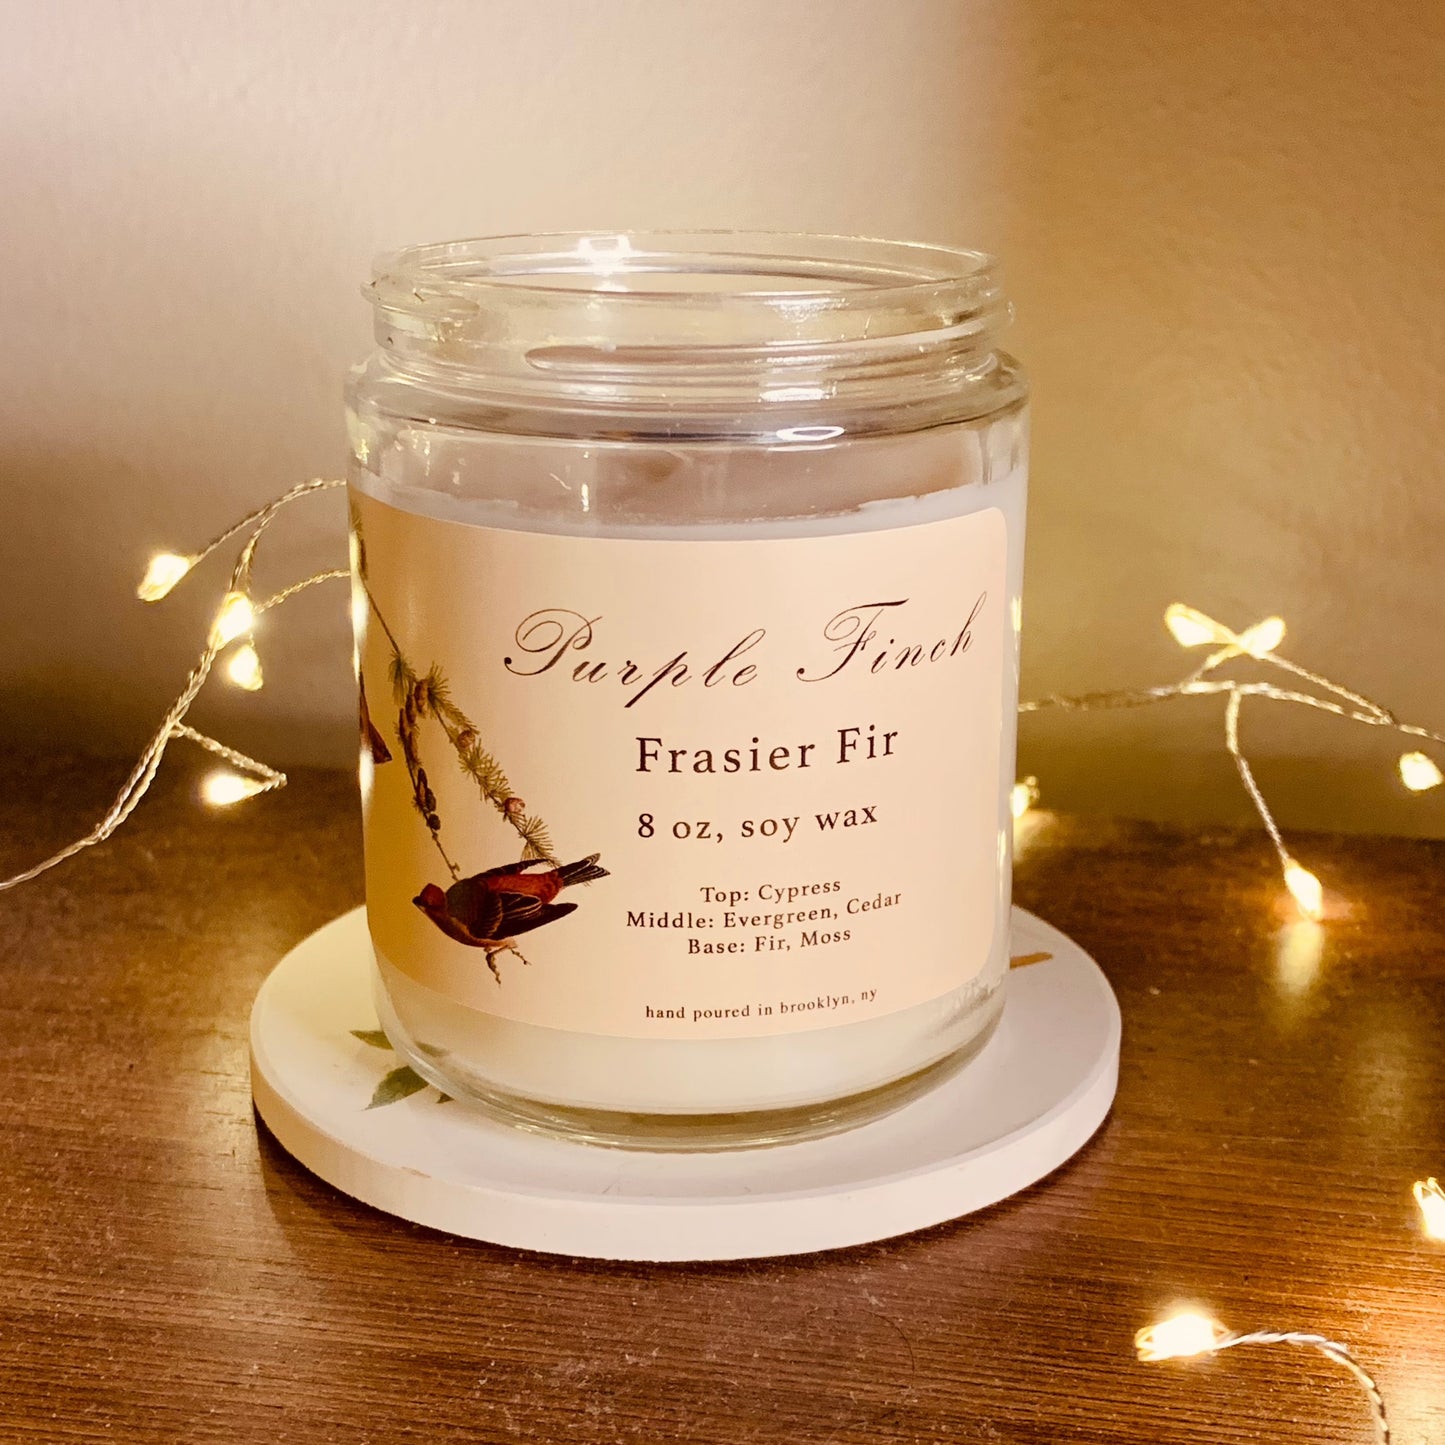 Purple Finch: Fraser Fir Scented Candle